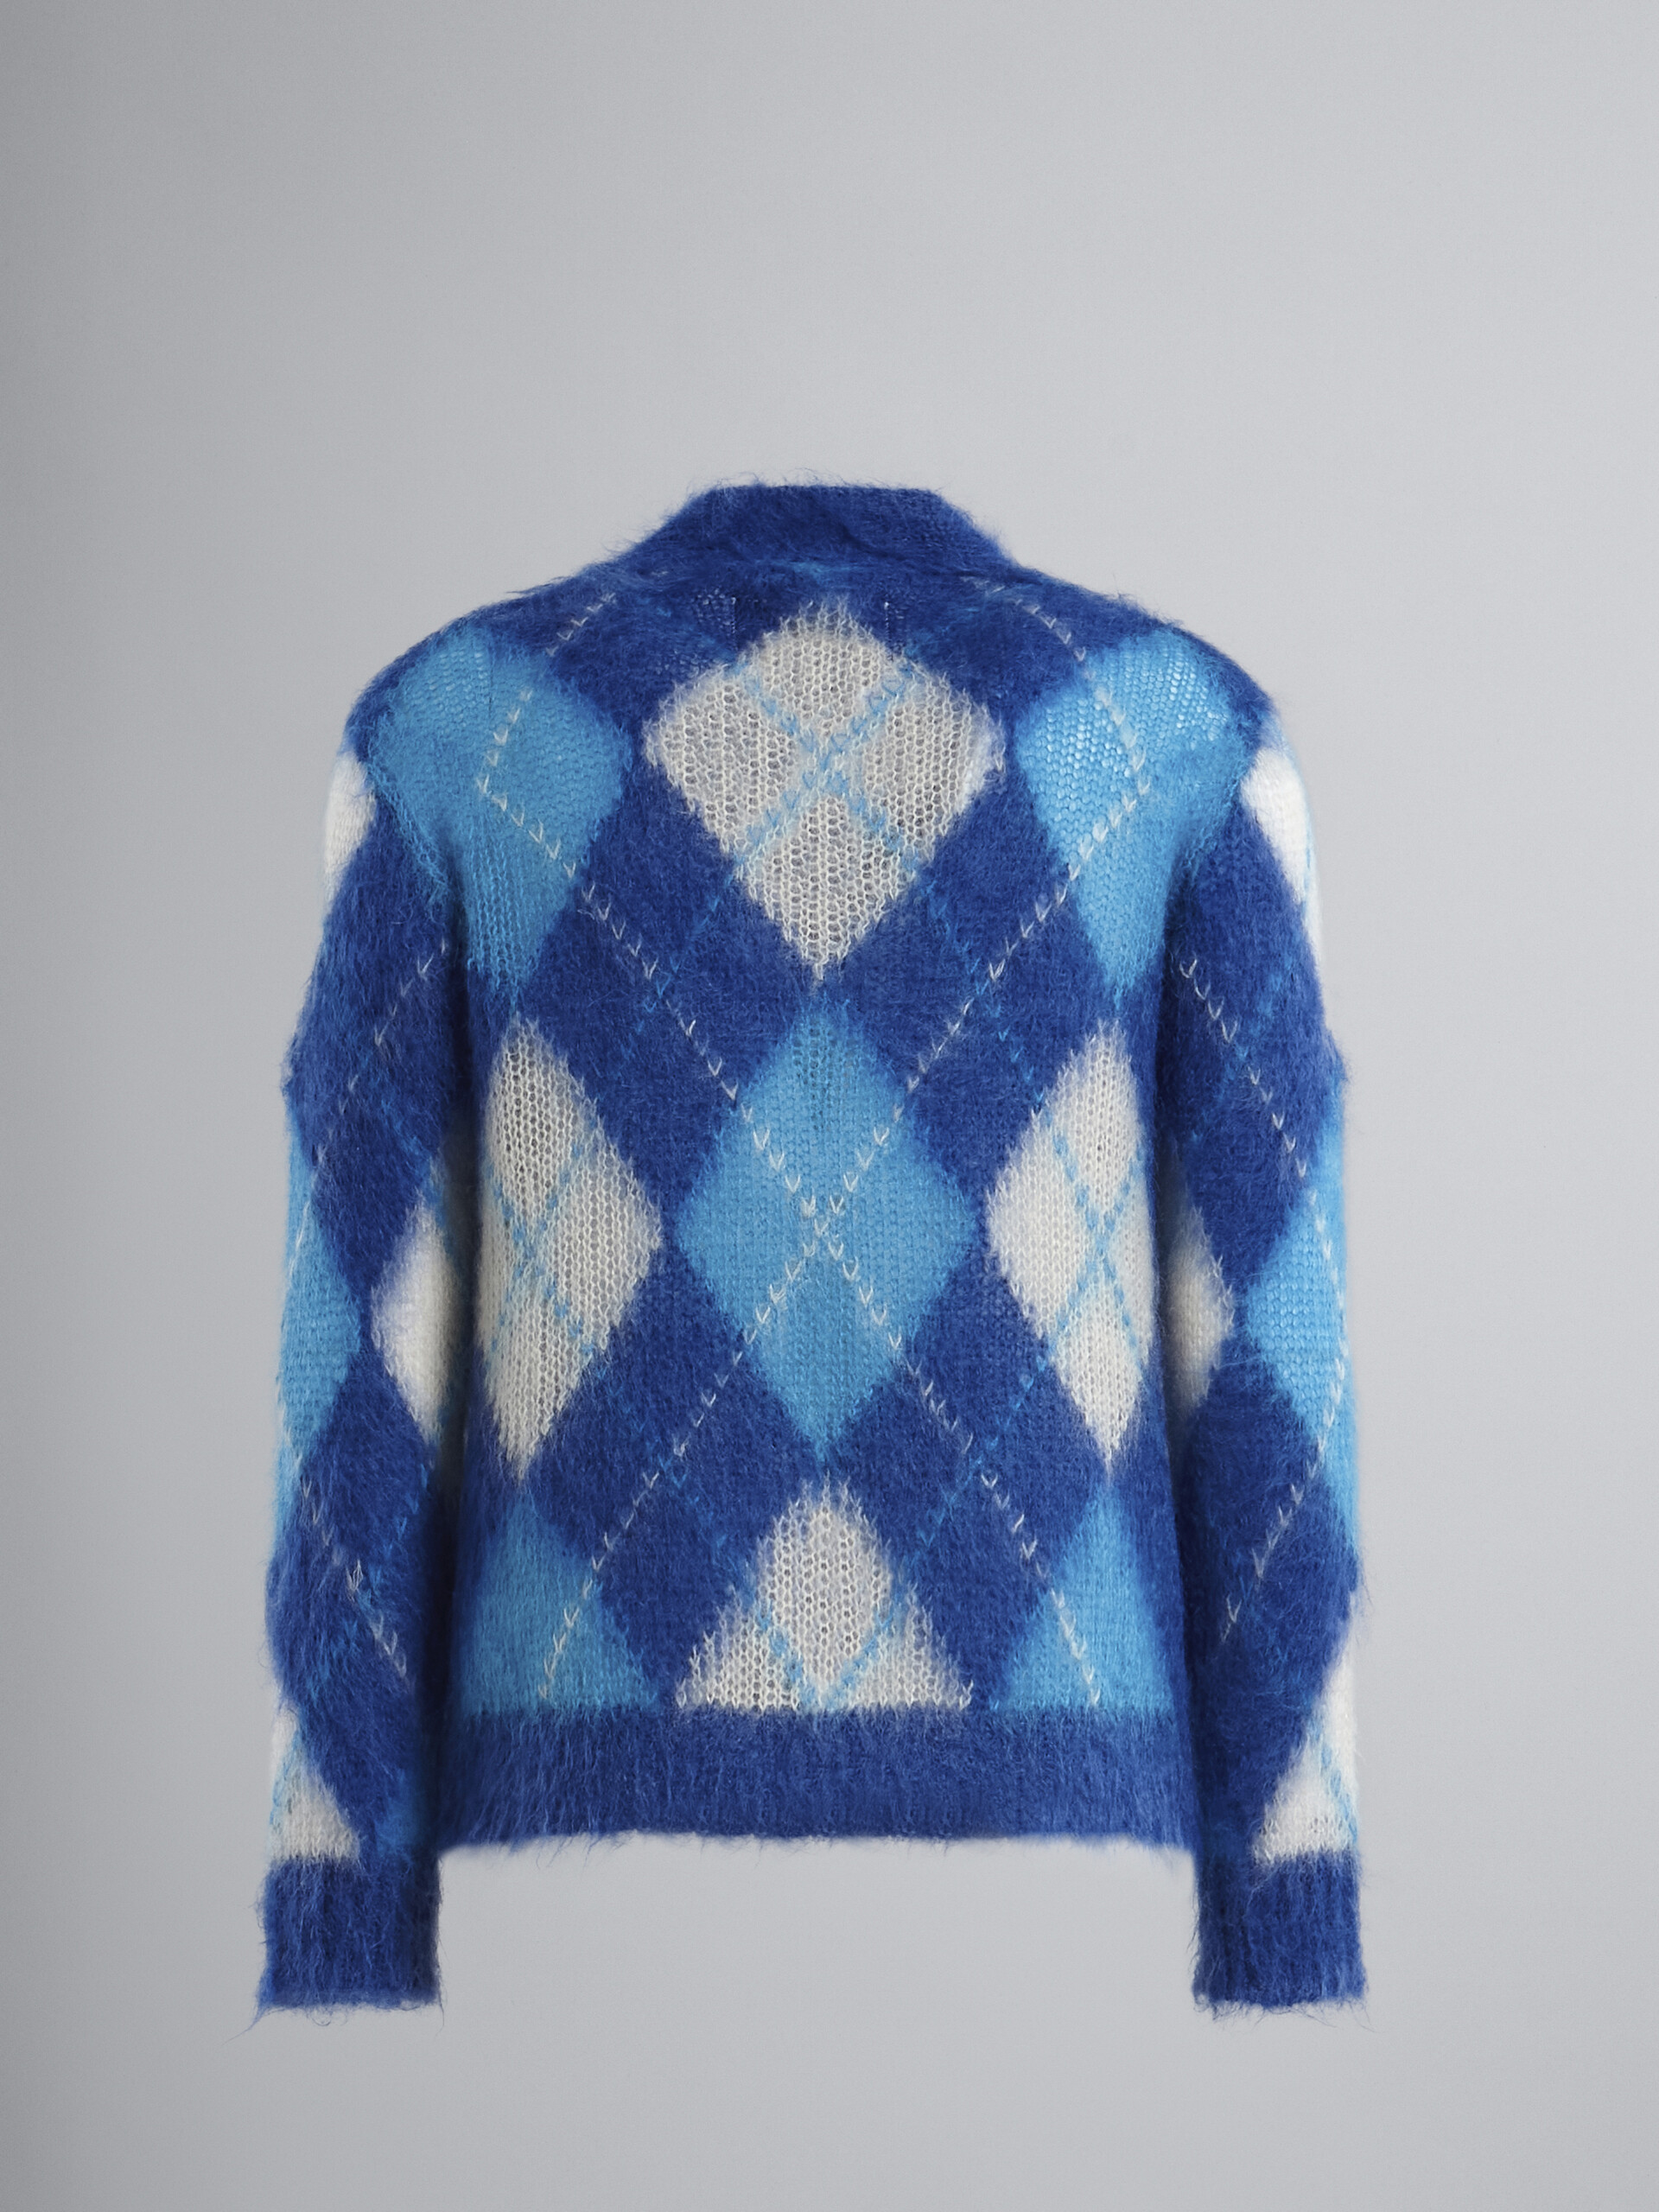 Iconic mohair Argyle cardigan - Pullovers - Image 3